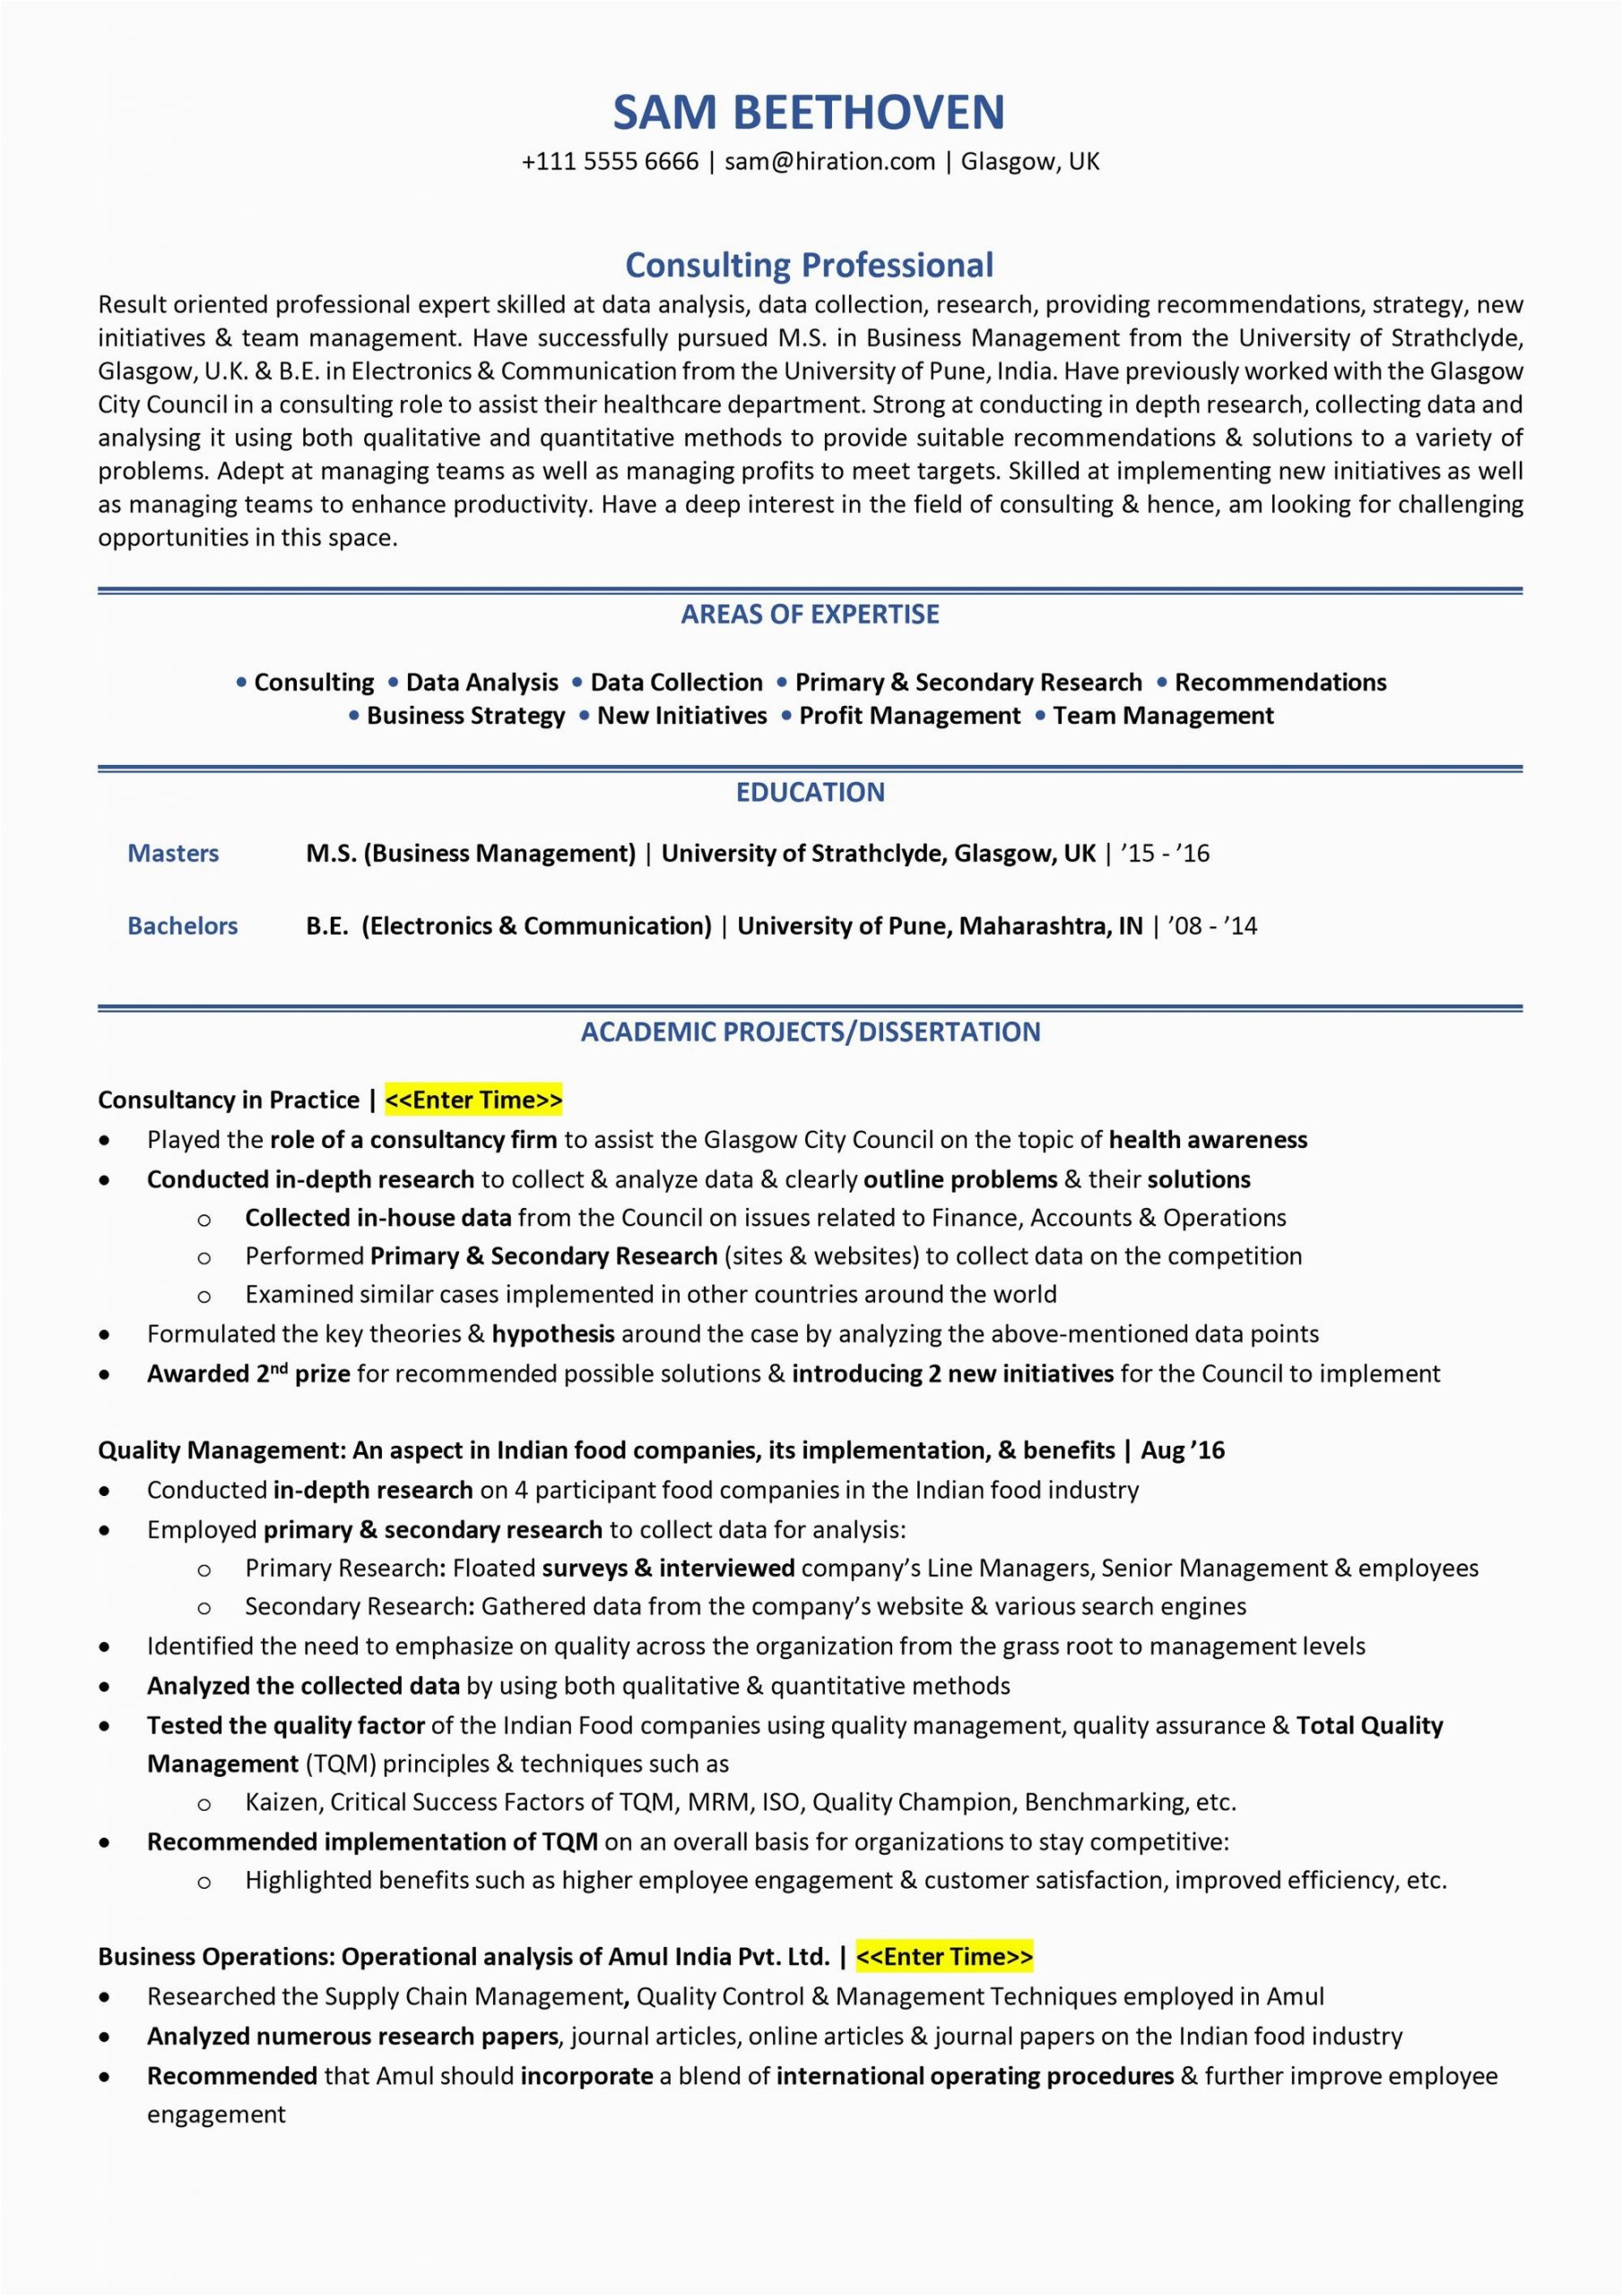 Sample Resume Profile for College Student Student Resume [2019] Guide to College Student Resume